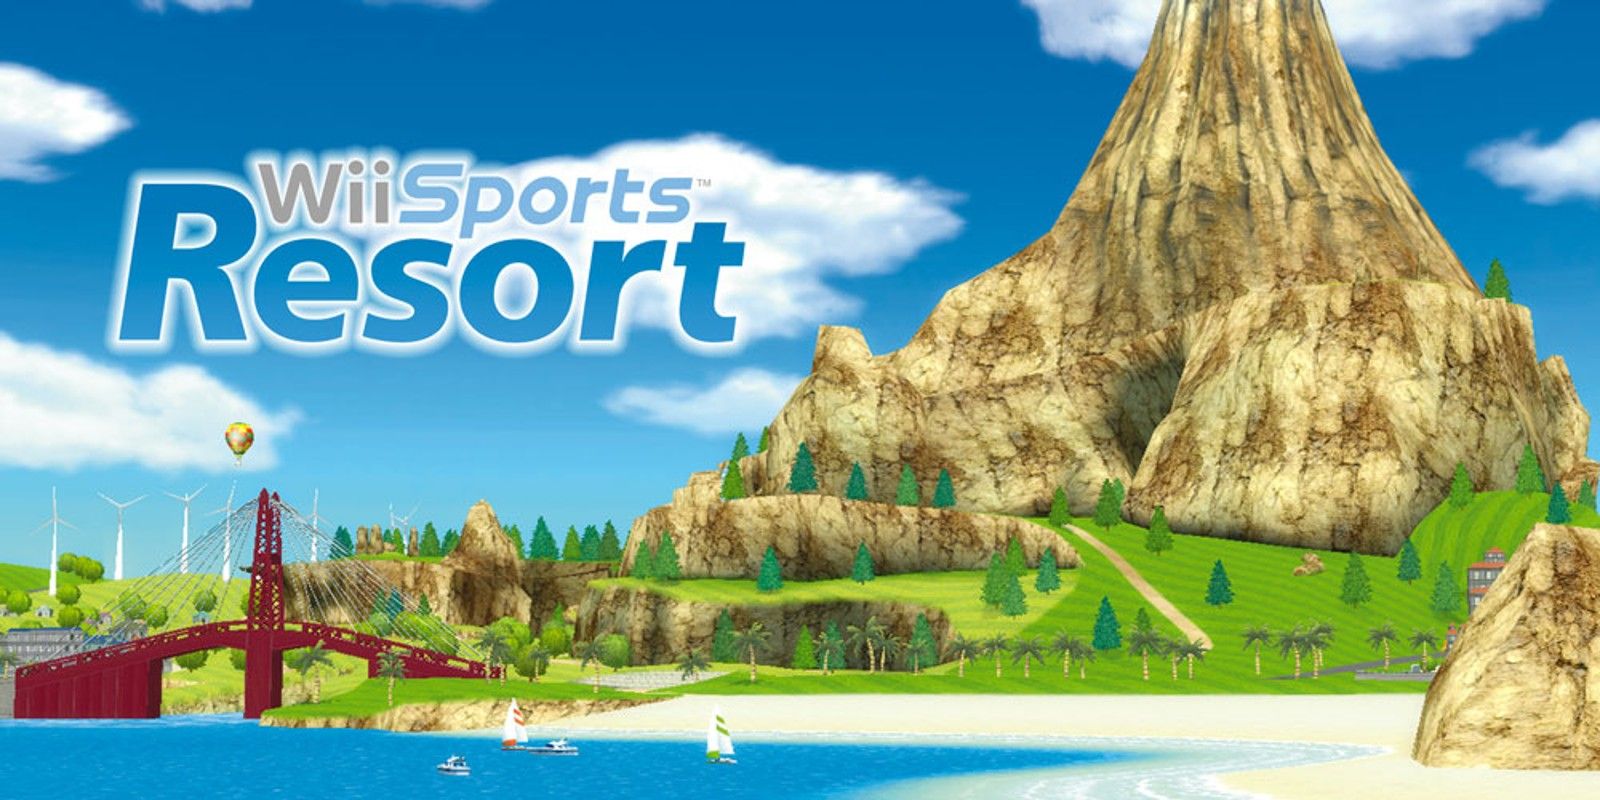 A view of the island in Wii Sports Resort